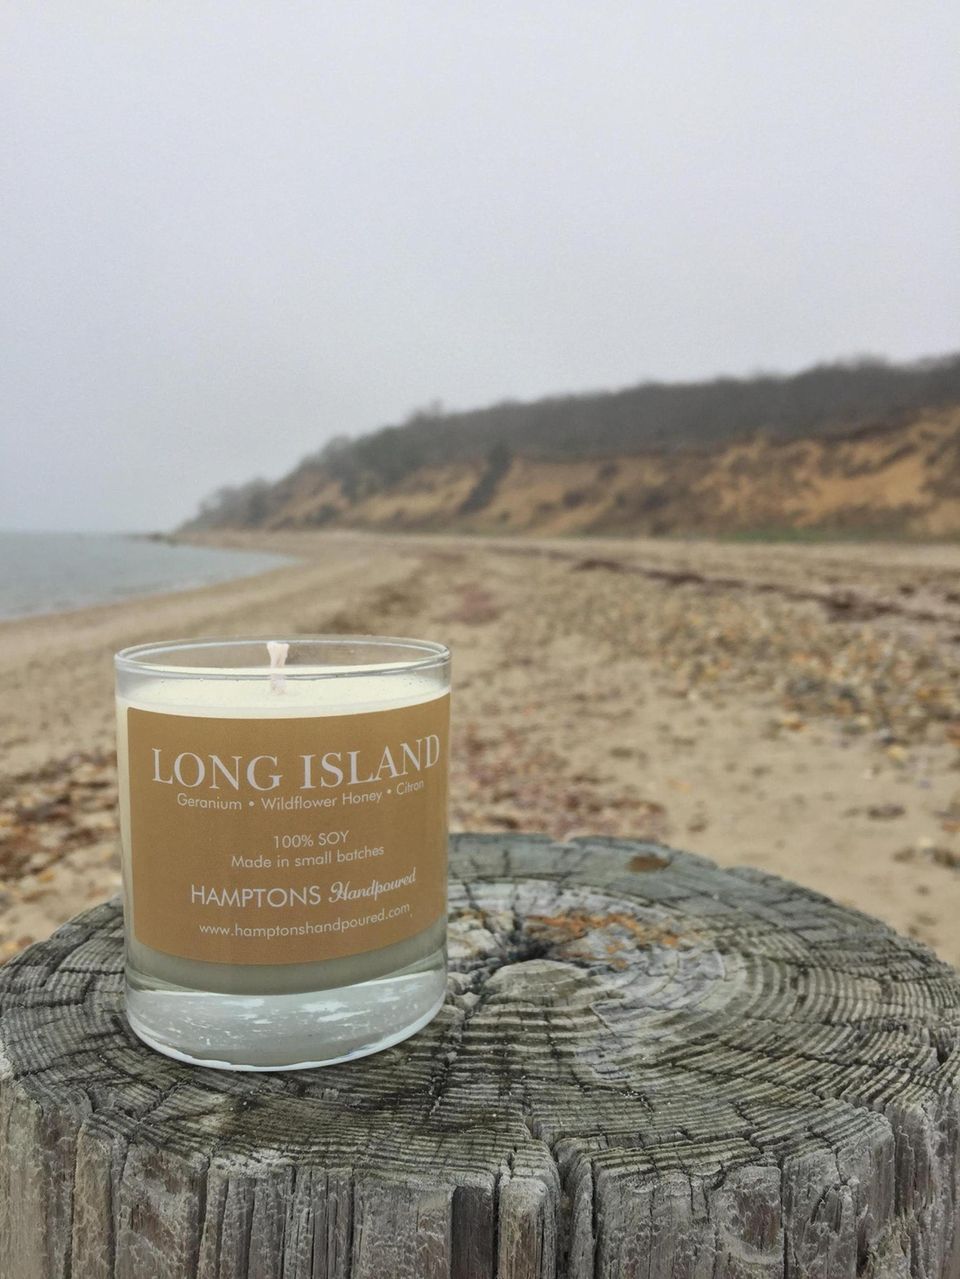 Every Long Island candle made by Hamptons Handpoured